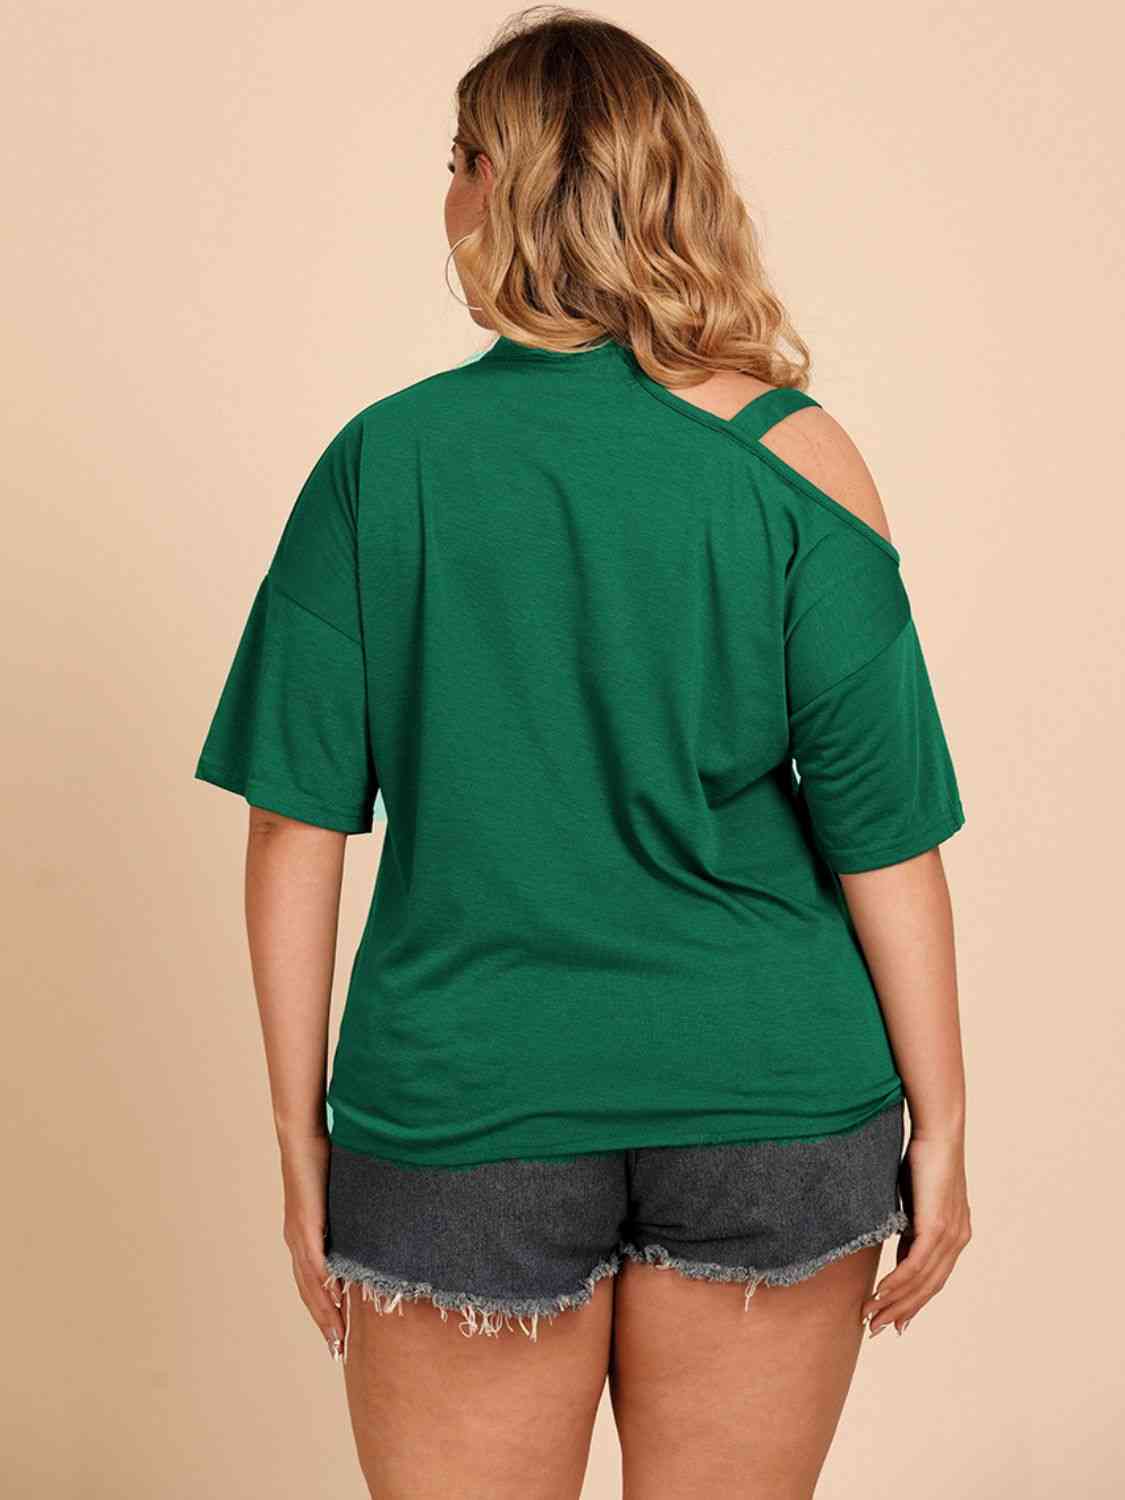 Give Someone The Cold Shoulder Tee Shirt - Texture Love and Tangle 